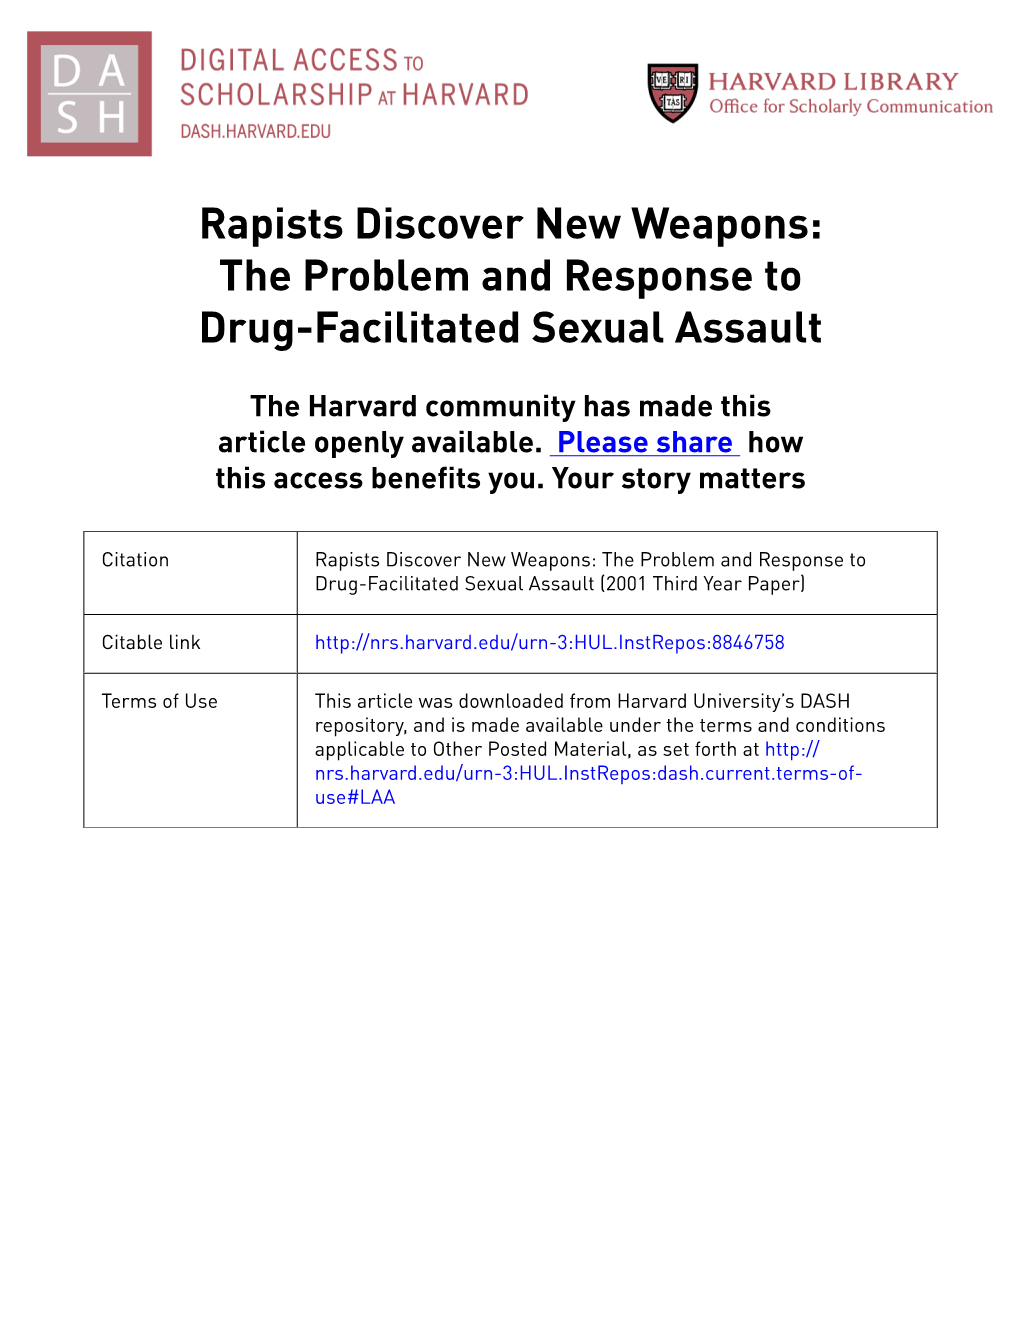 The Problem and Response to Drug-Facilitated Sexual Assault